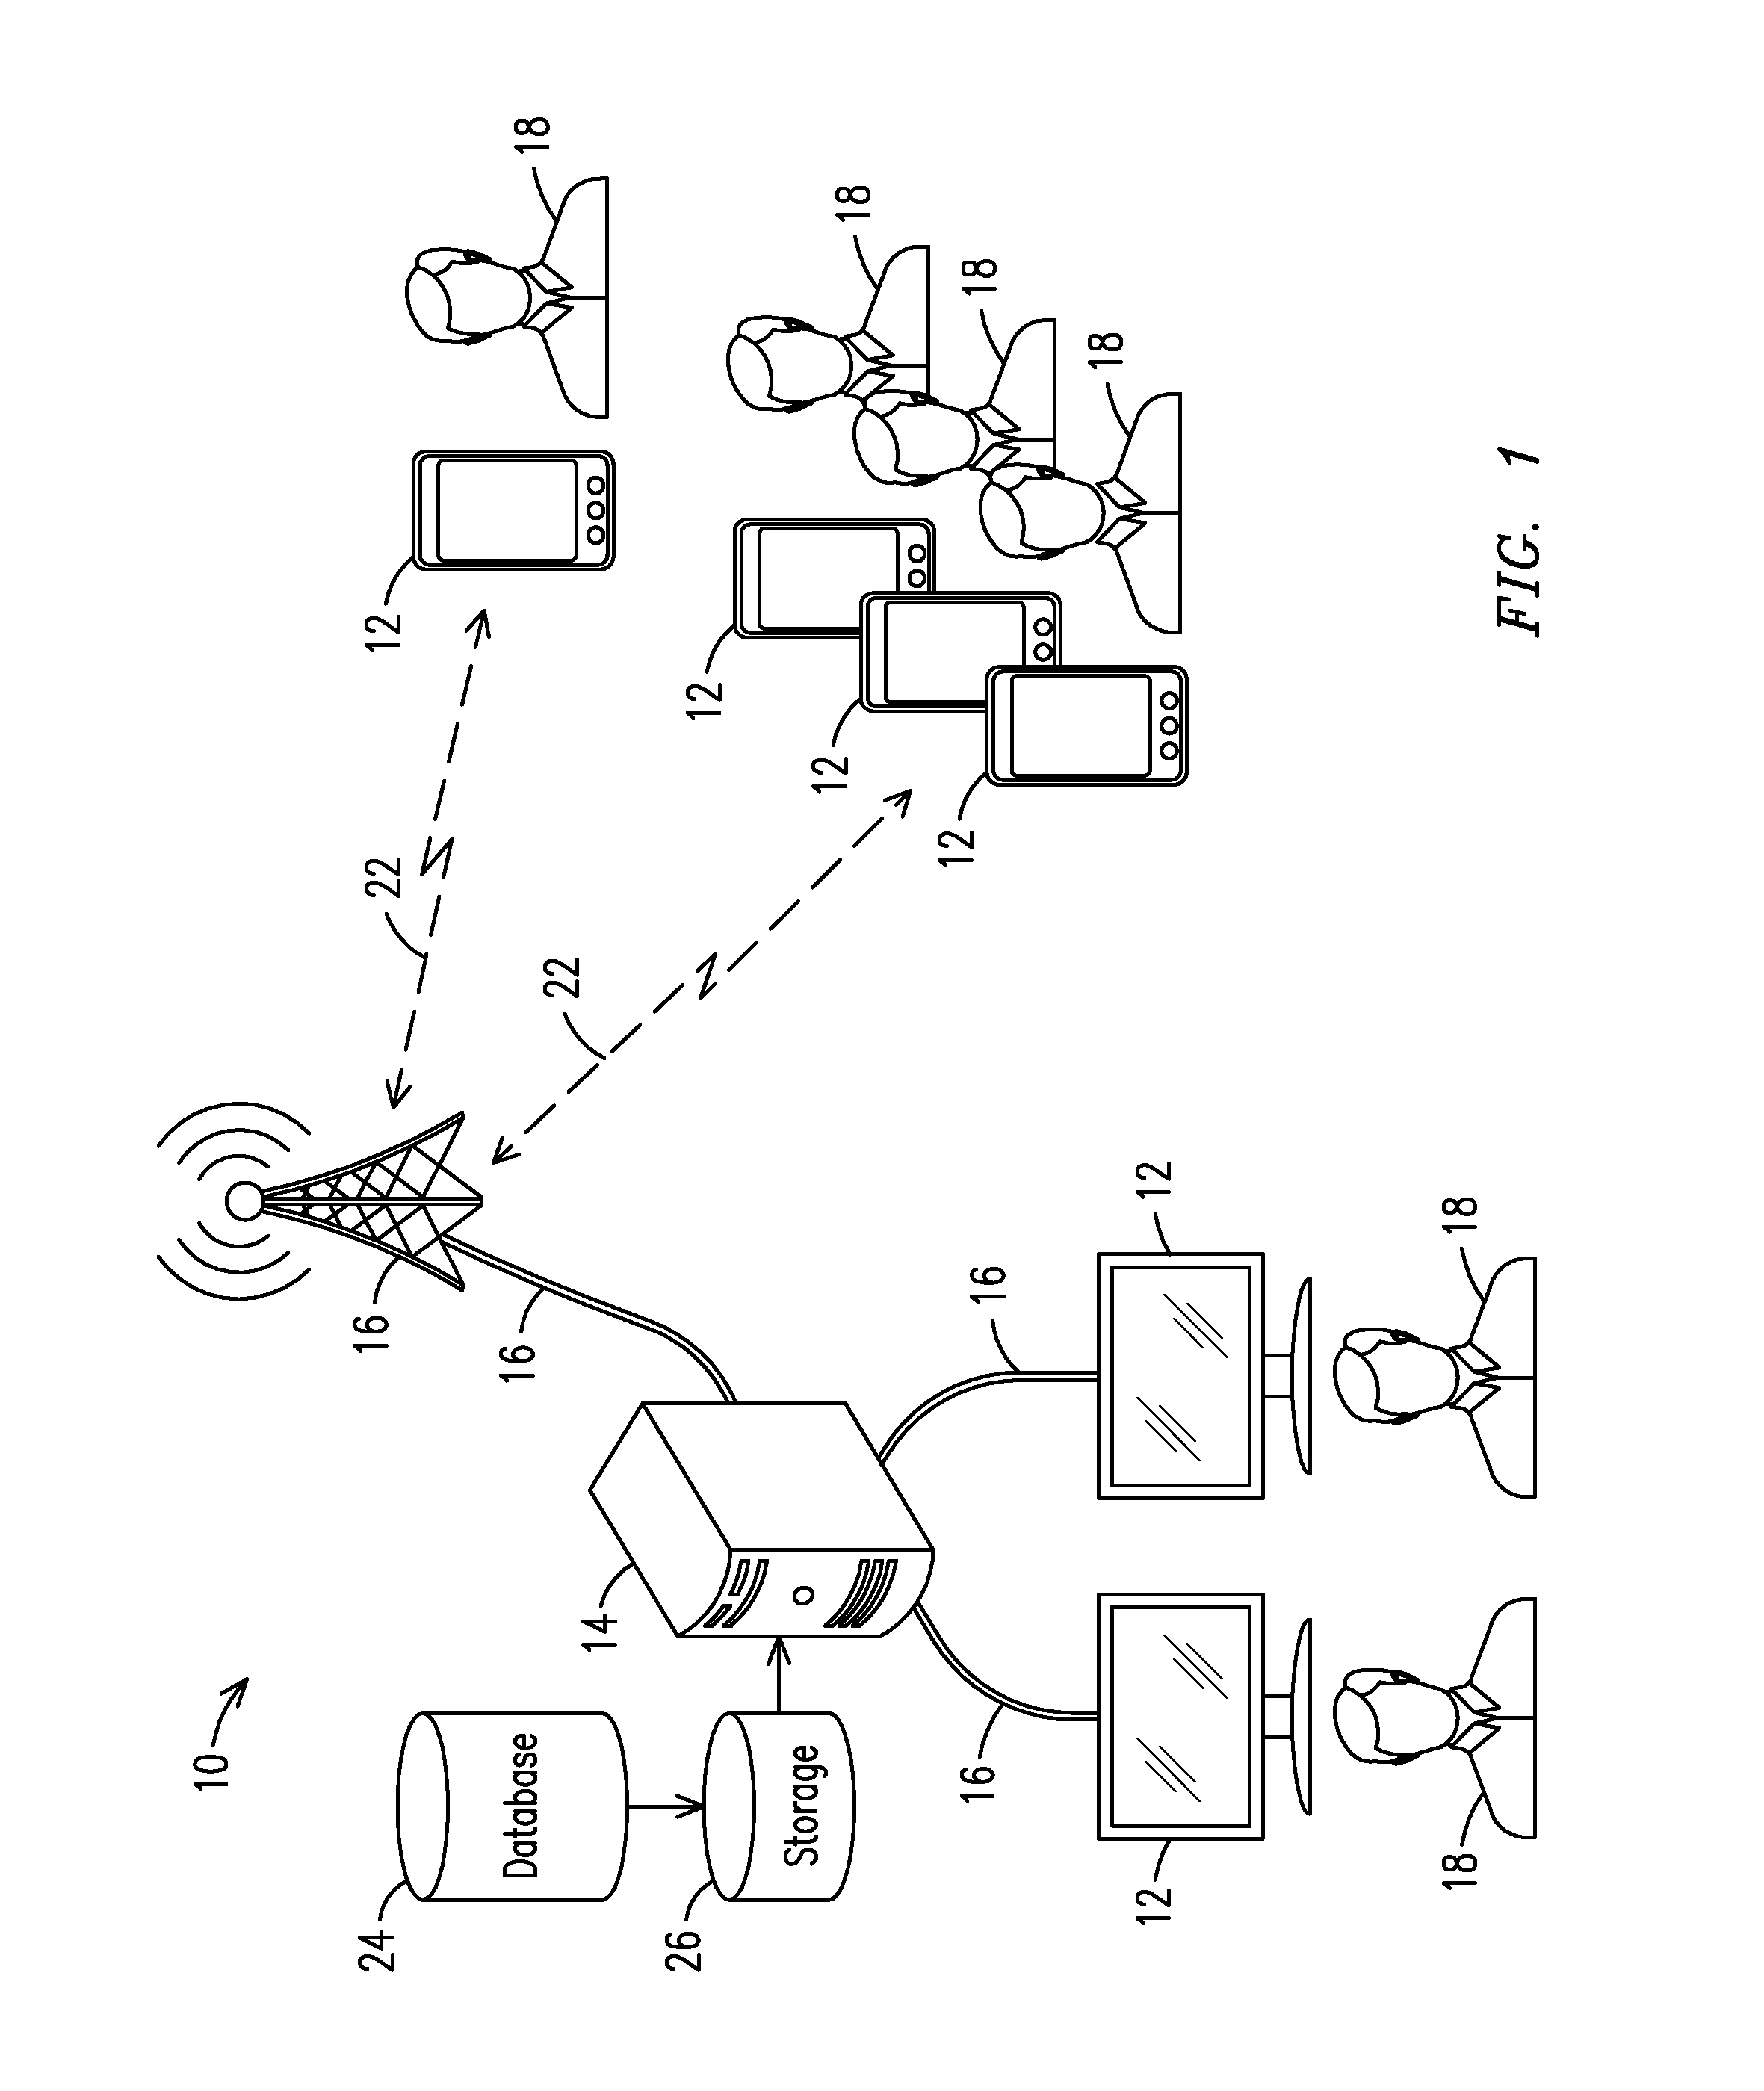 Integrated Systems and Methods Providing Situational Awareness of Operations In An Orgranization